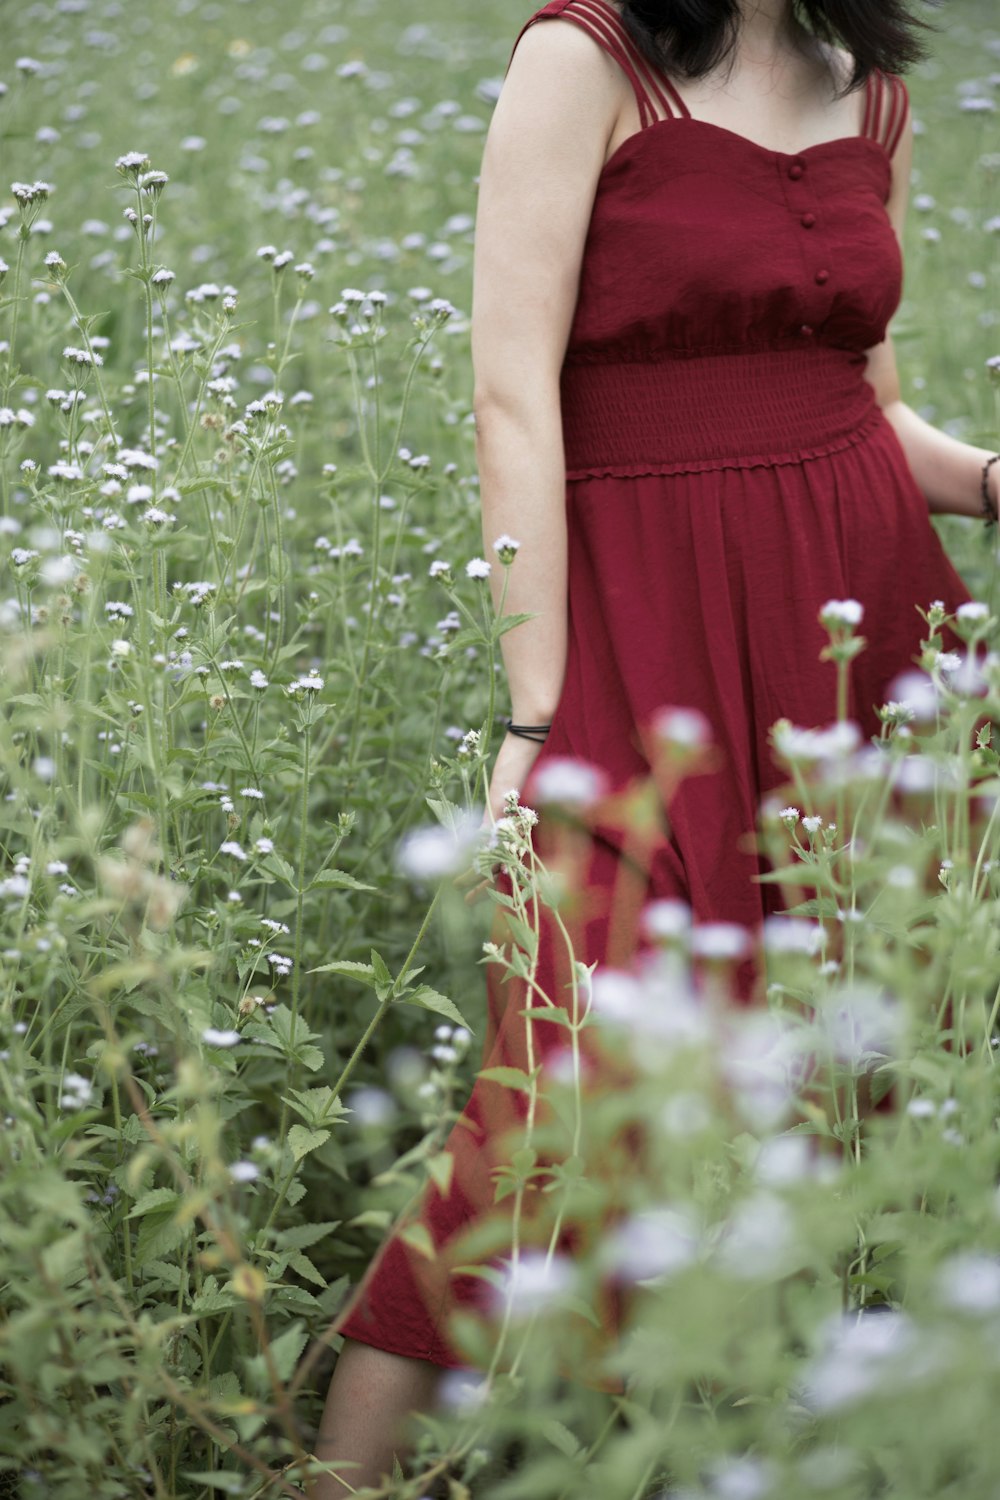 woman in red dress standing on green grass field during daytime